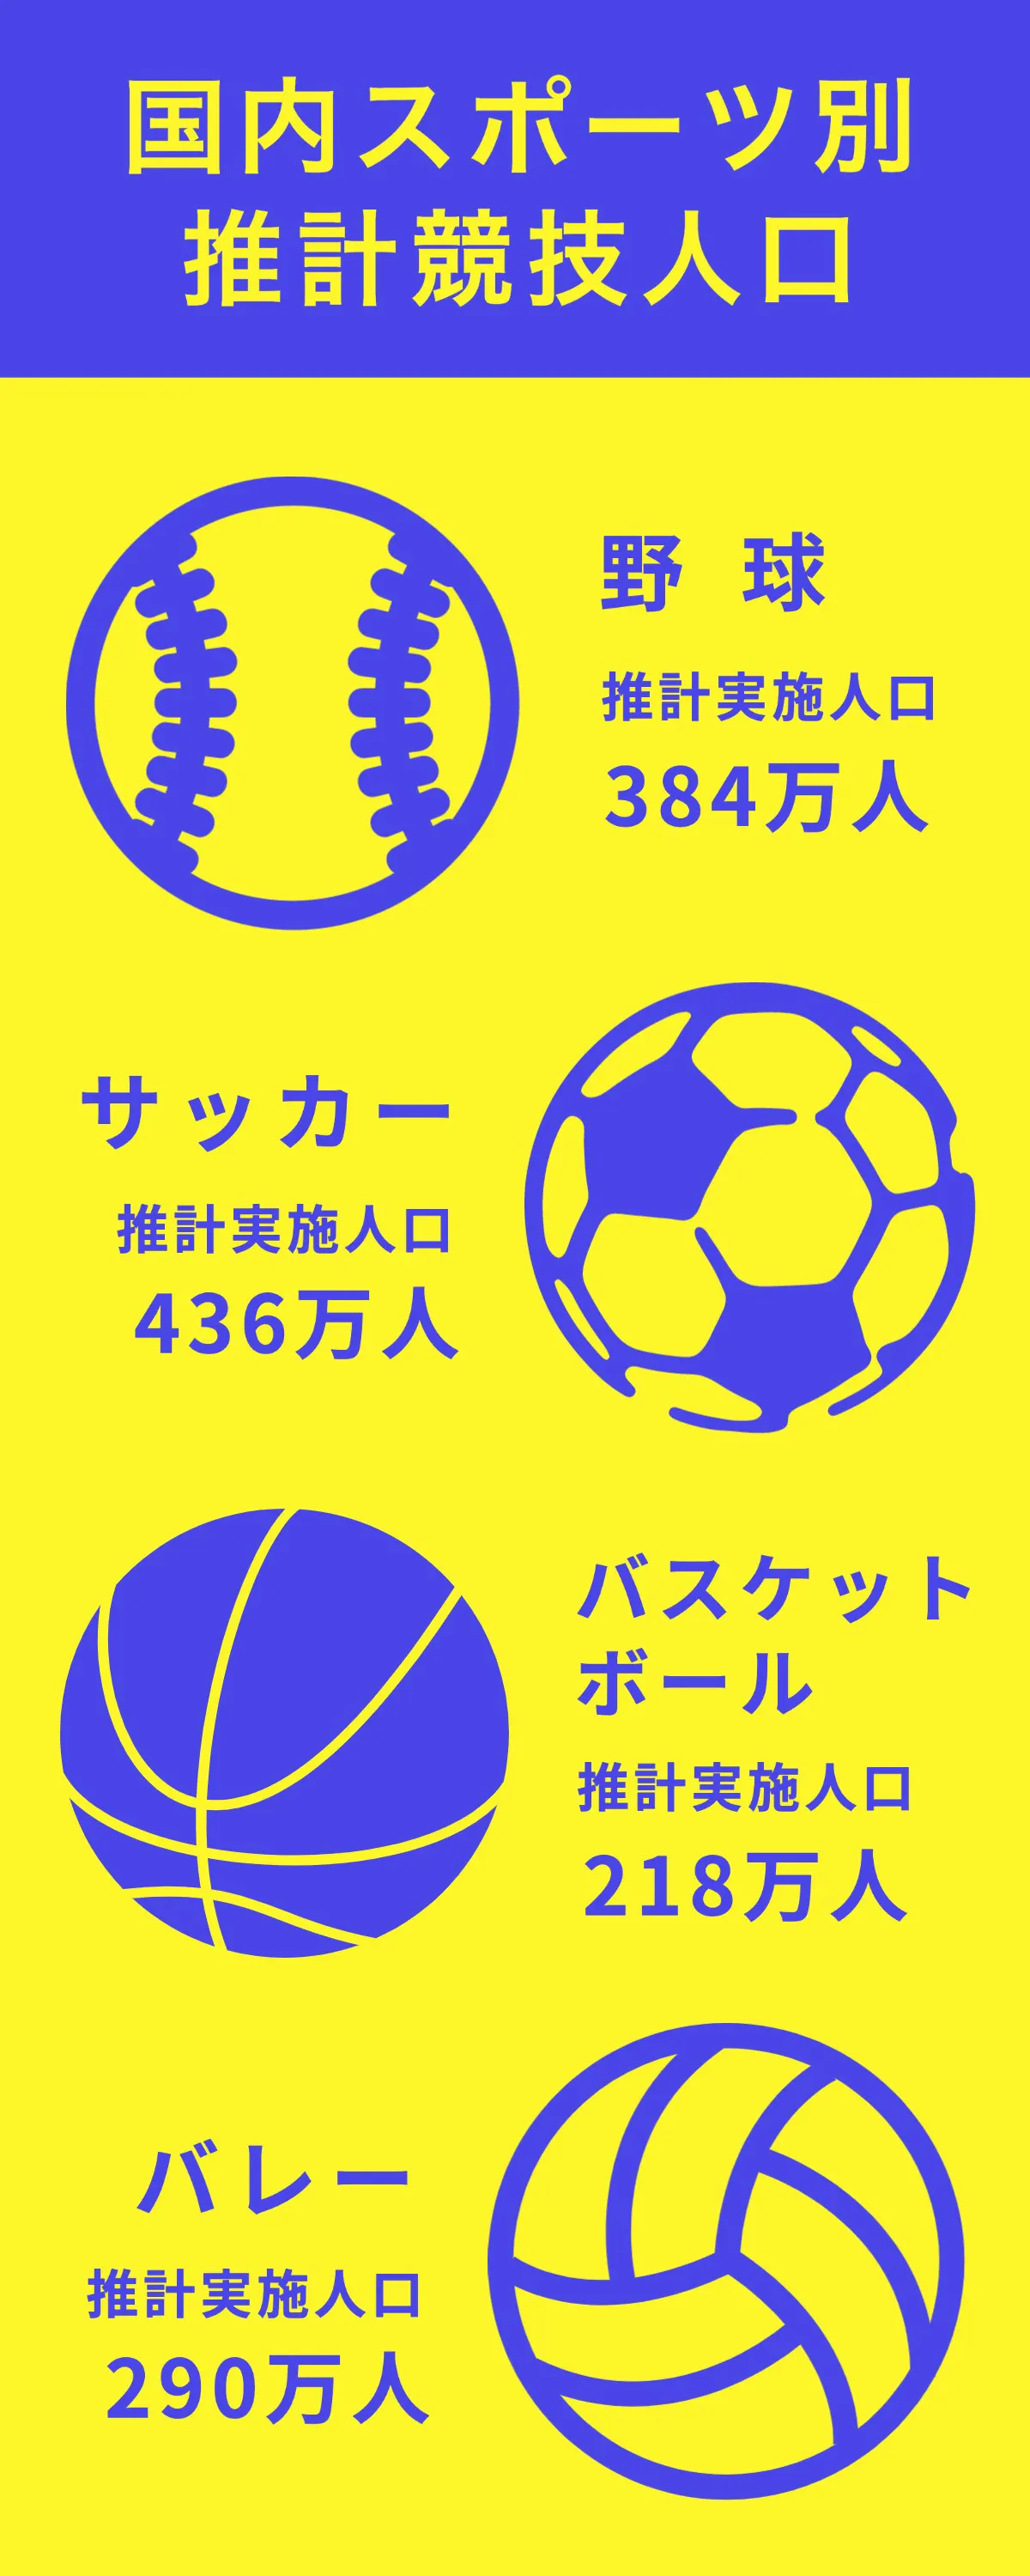 Sports competition population infographic